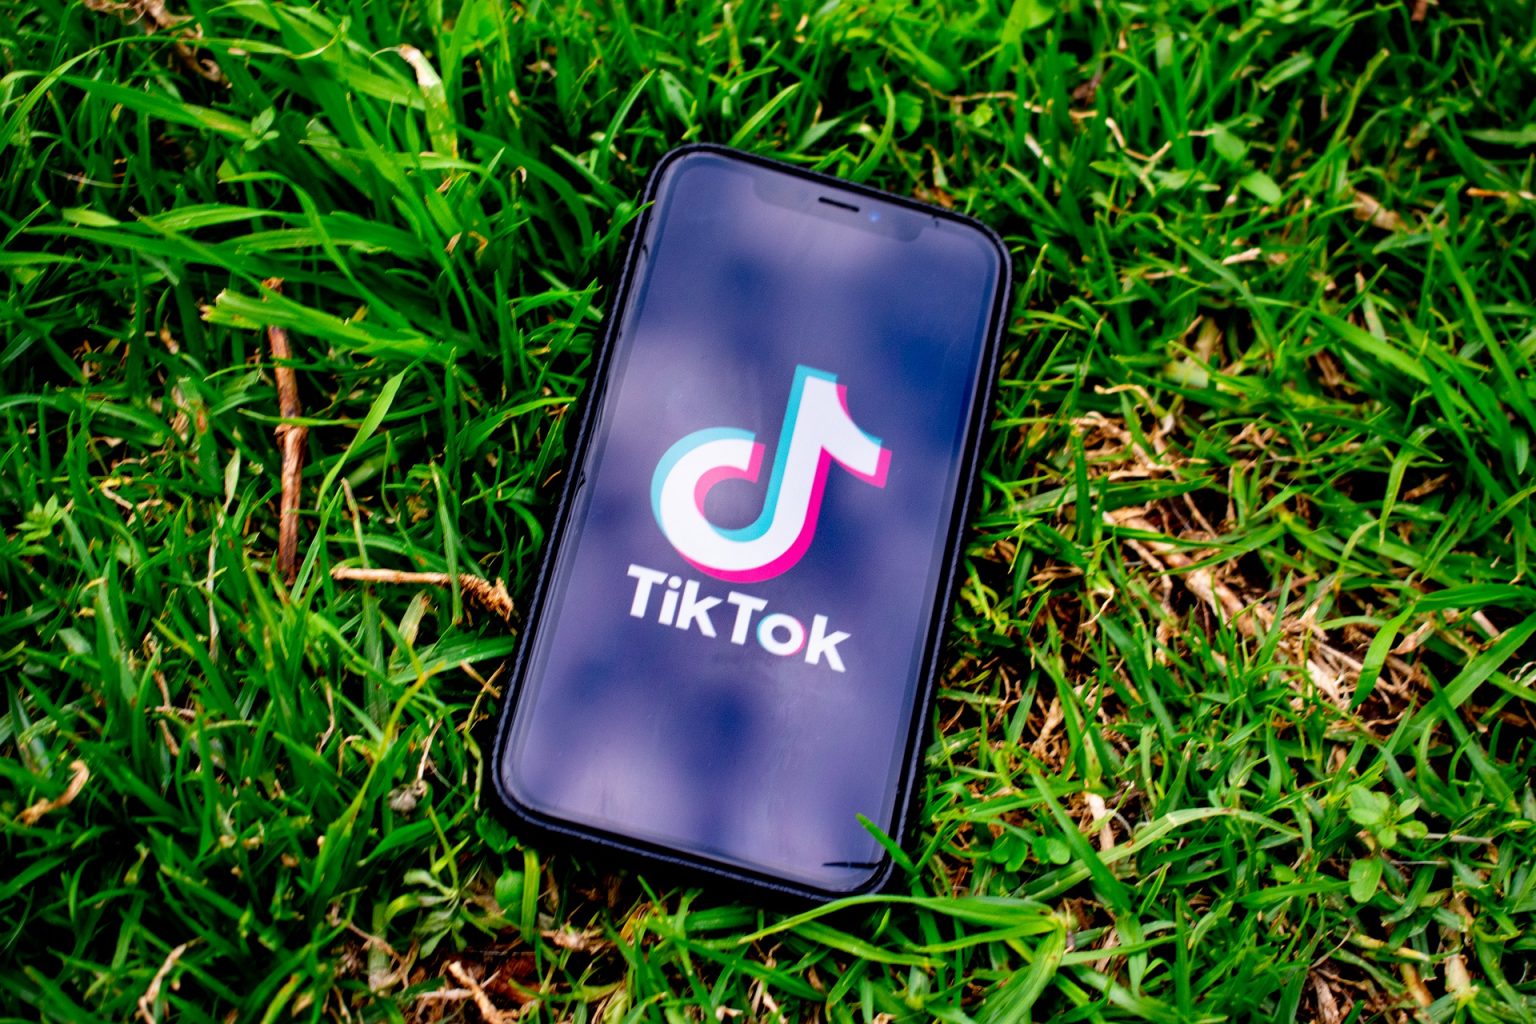 How To Discover The Top Trending Songs On USA TikTok 2022